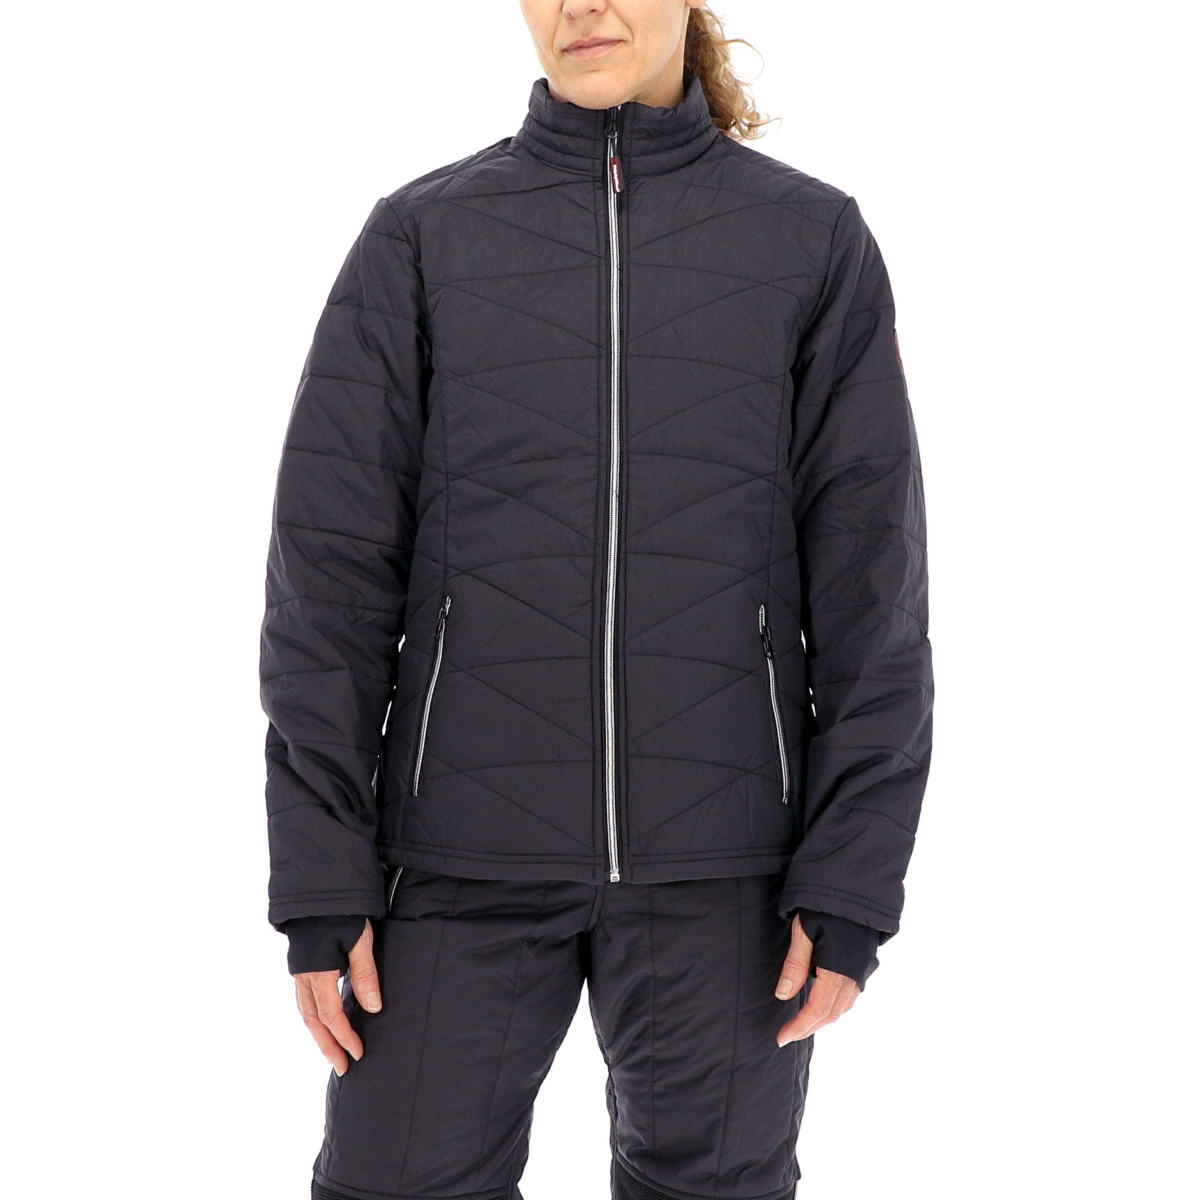 Women's Warm Lightweight Packable Quilted Ripstop Insulated Jacket - Black